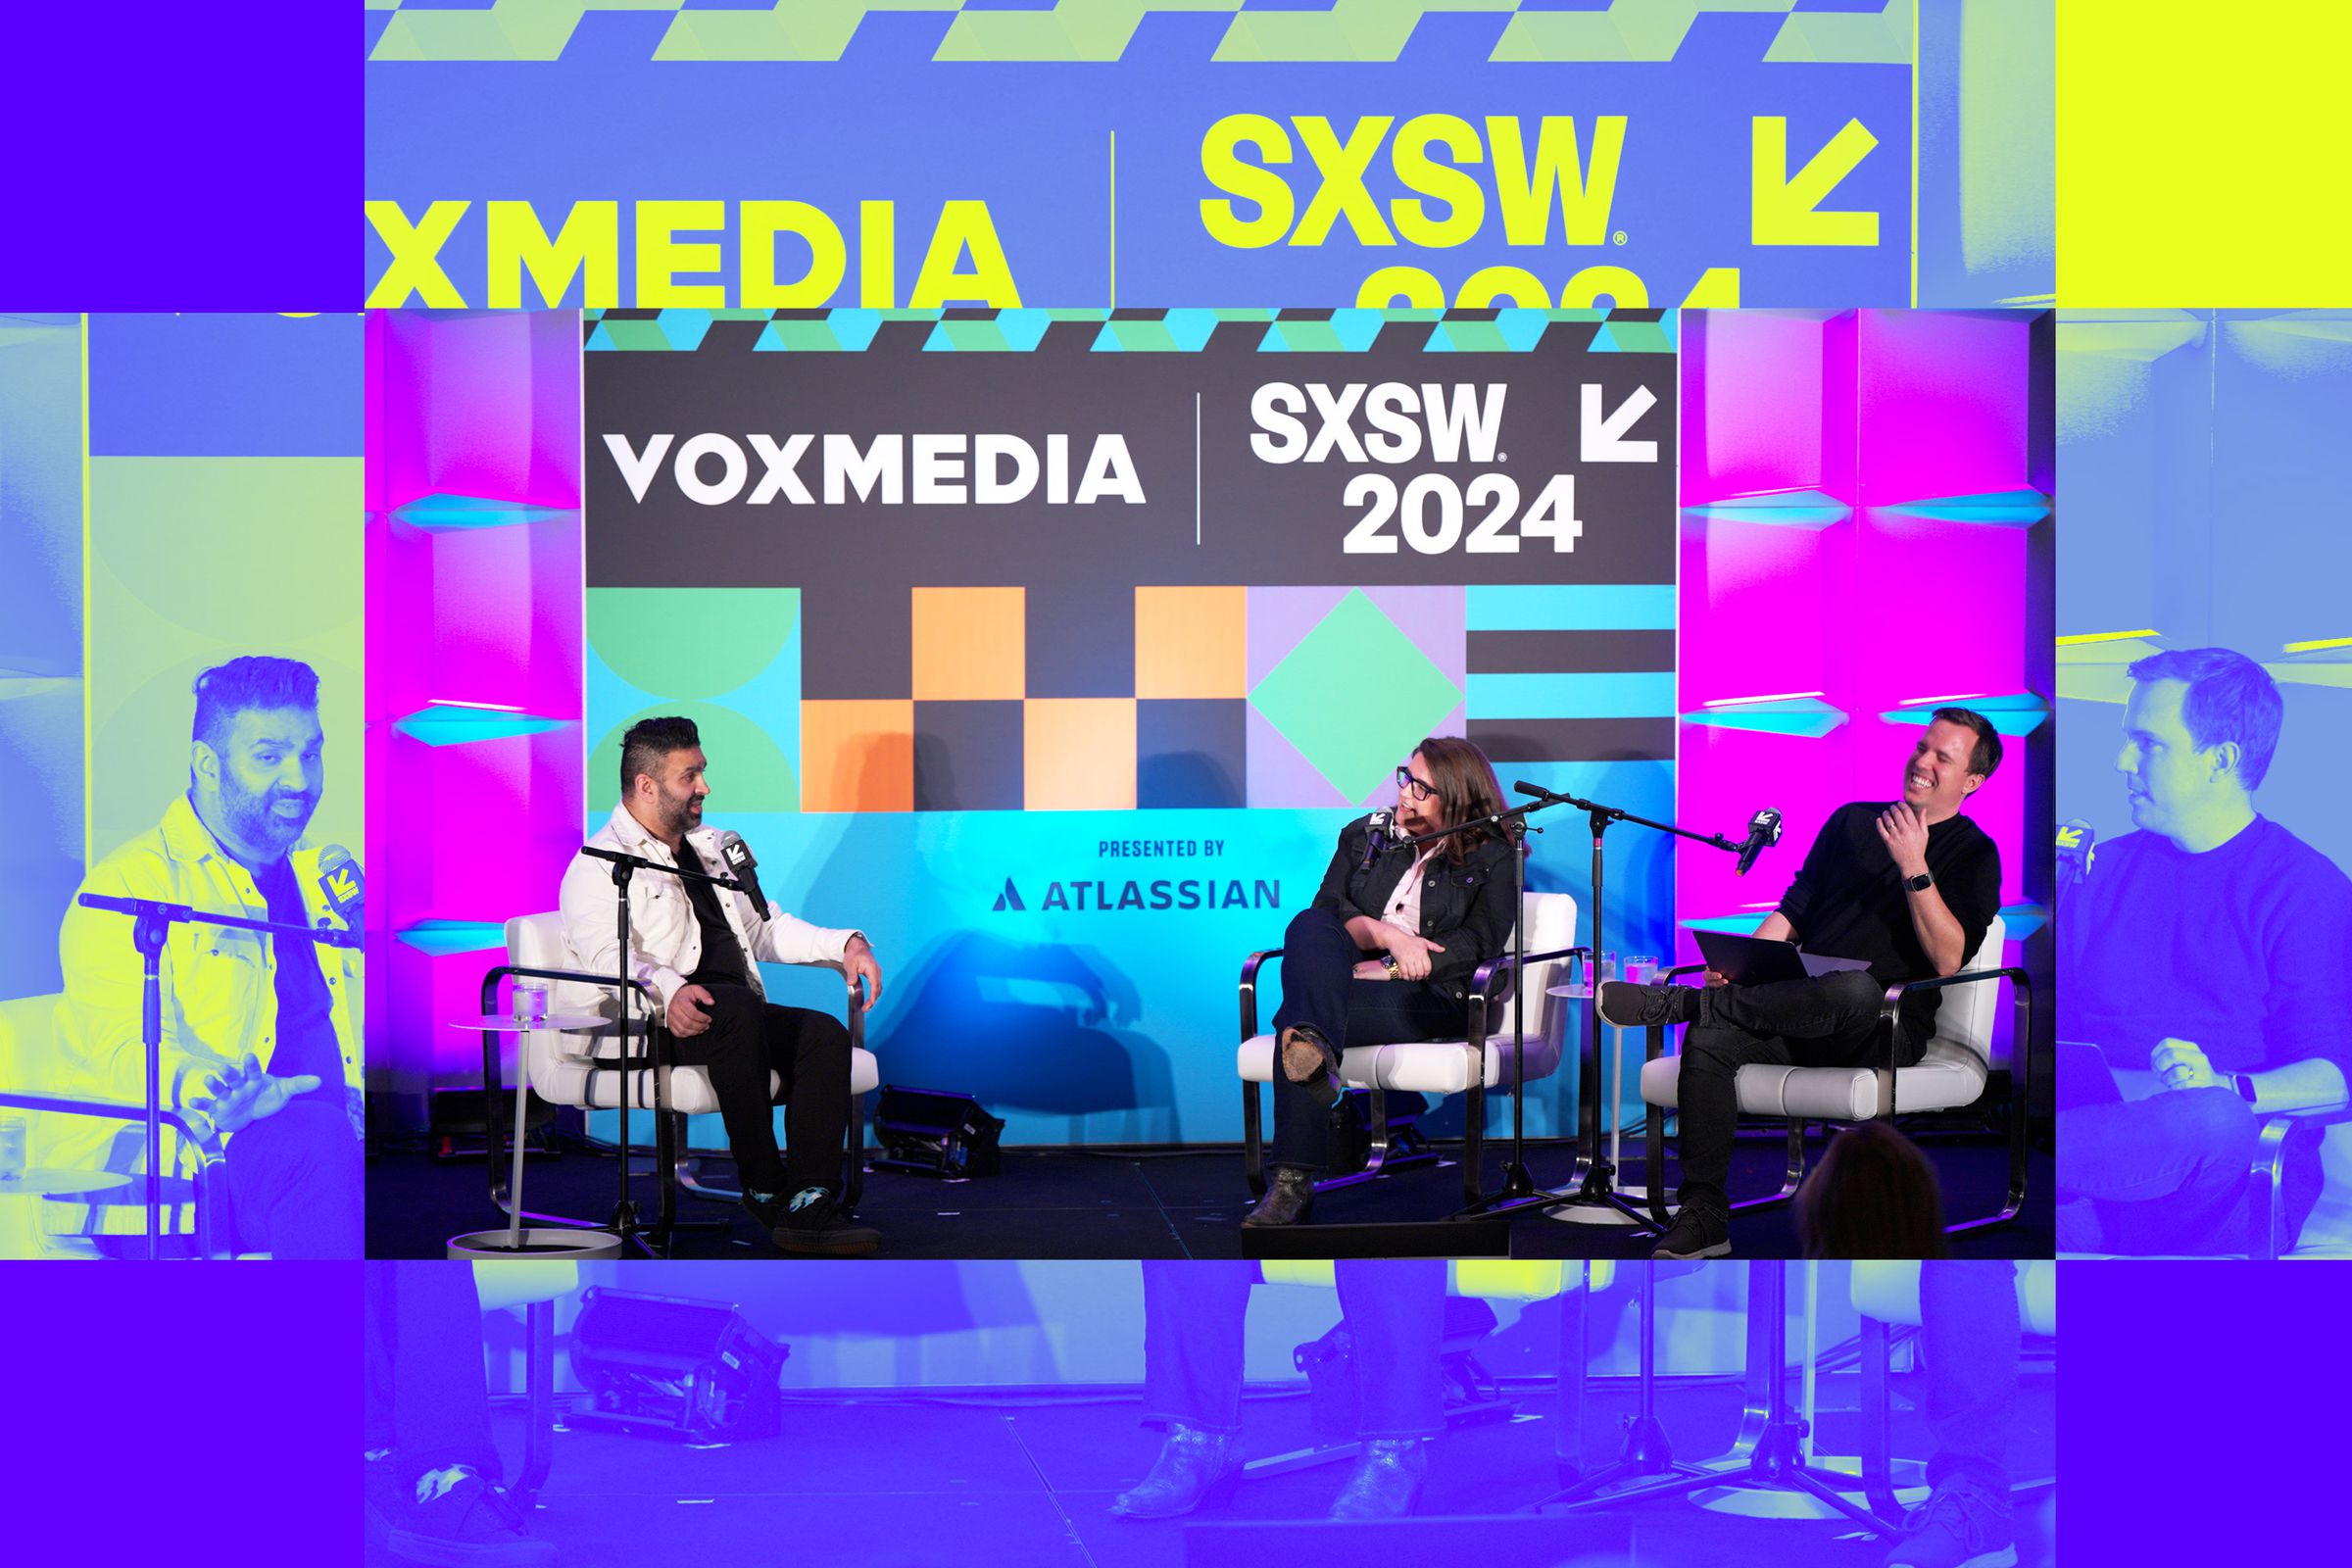 An illustration of the Vergecast team onstage at SXSW.